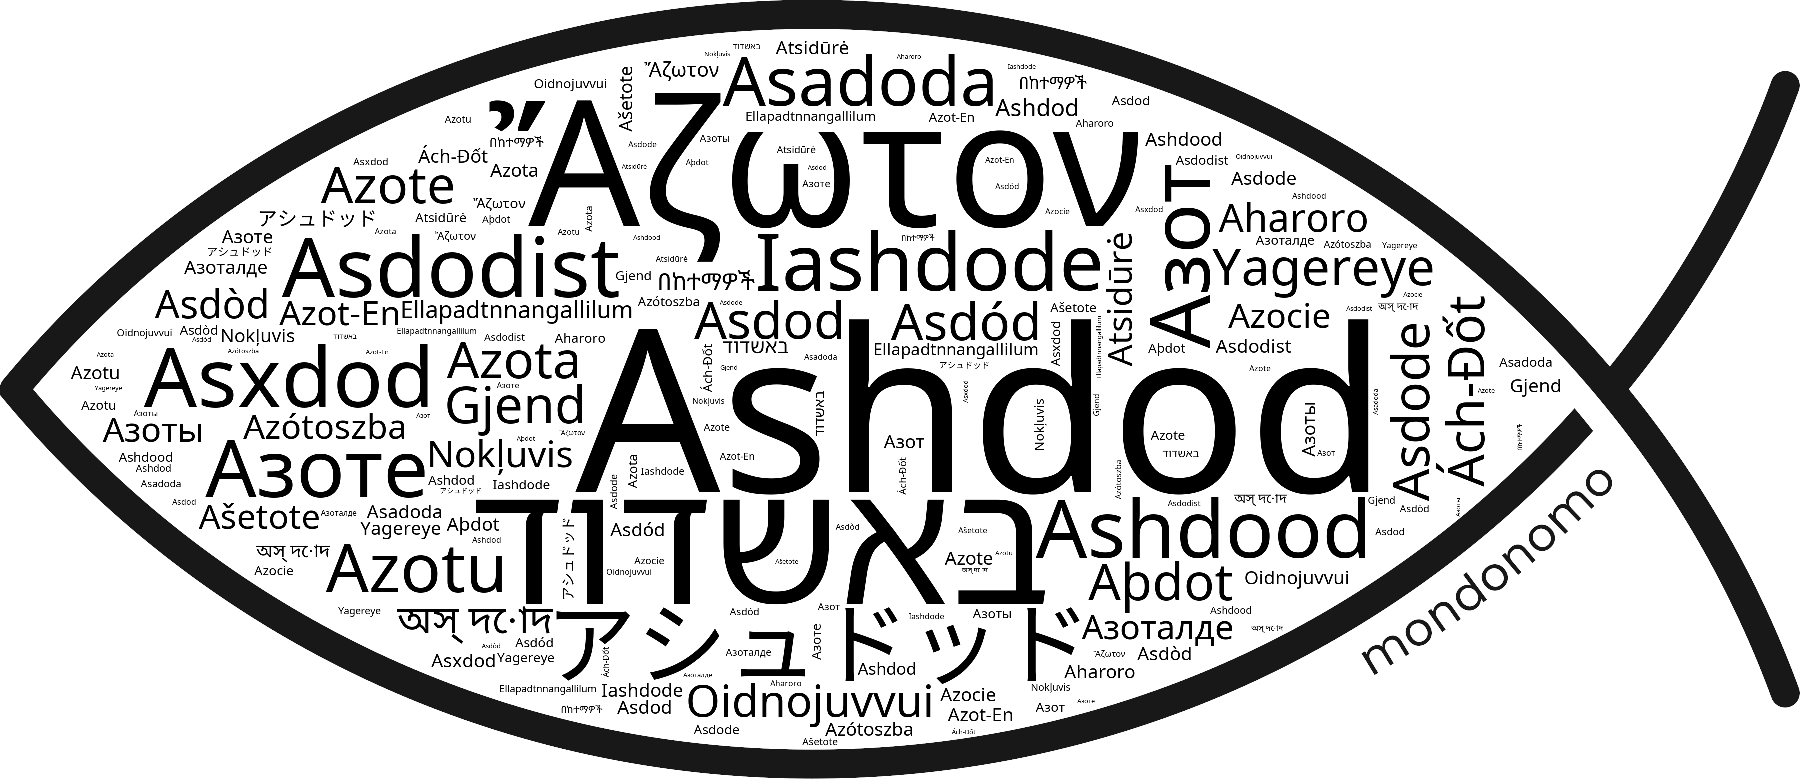 Name Ashdod in the world's Bibles